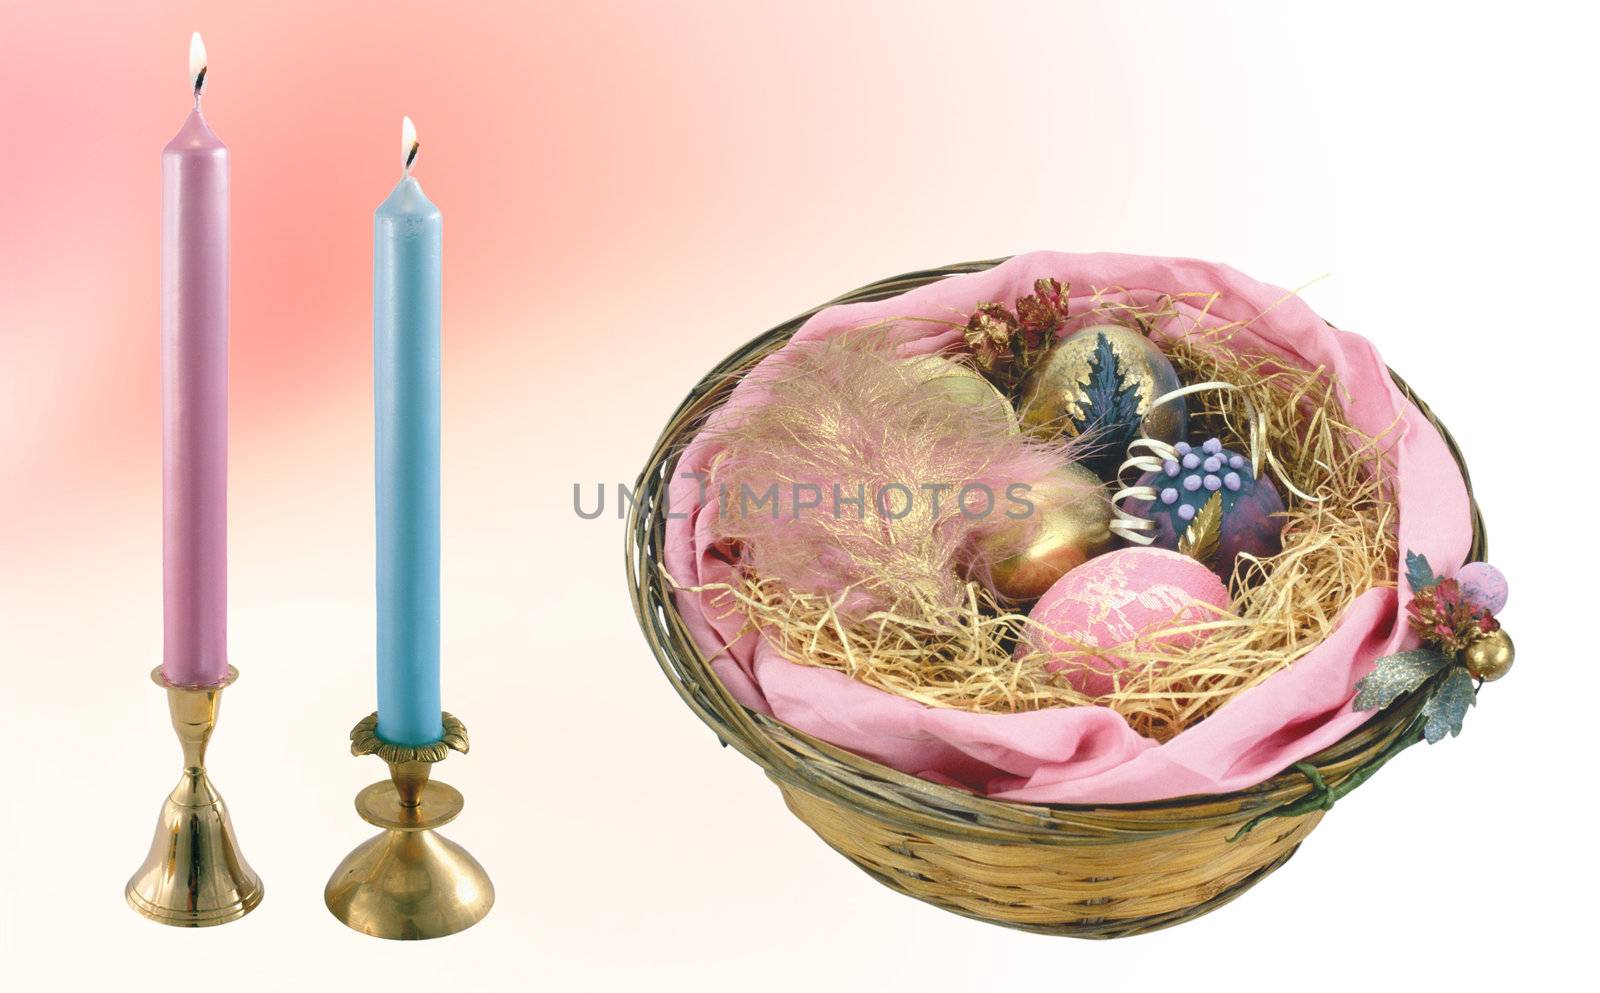 Nice combination with colored eggs and two candles